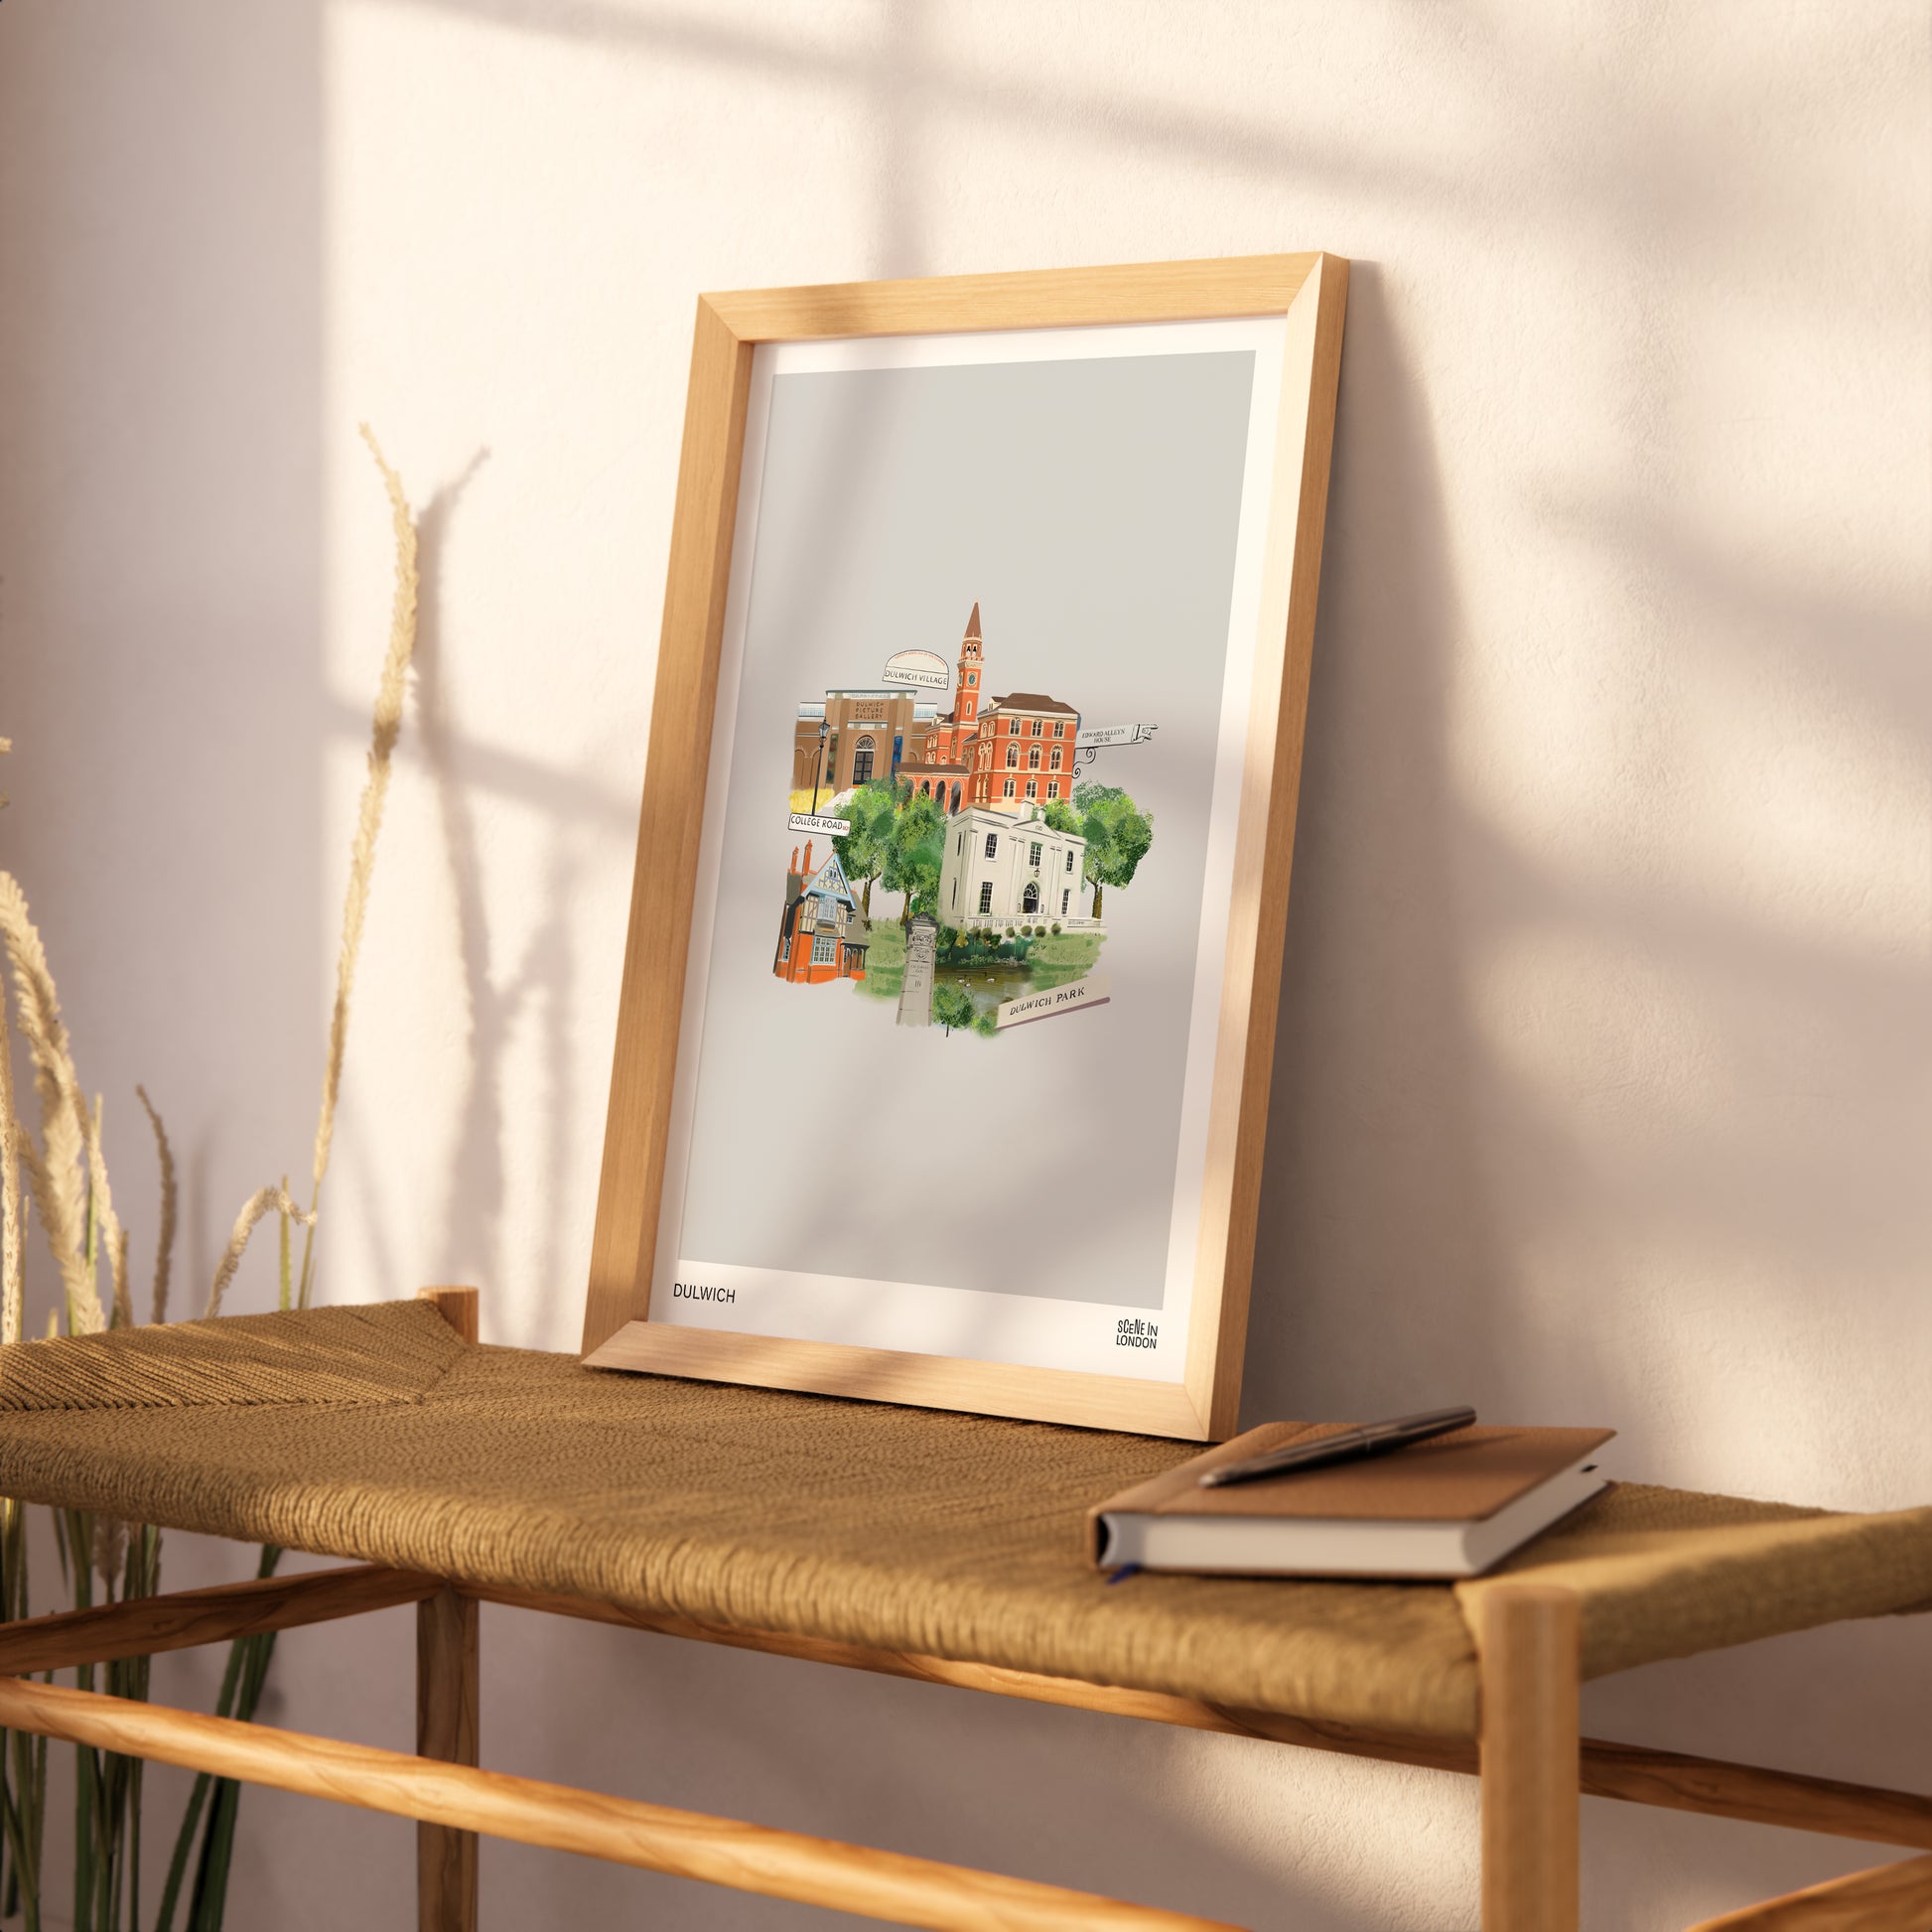 Dulwich print featuring places in Dulwich, London